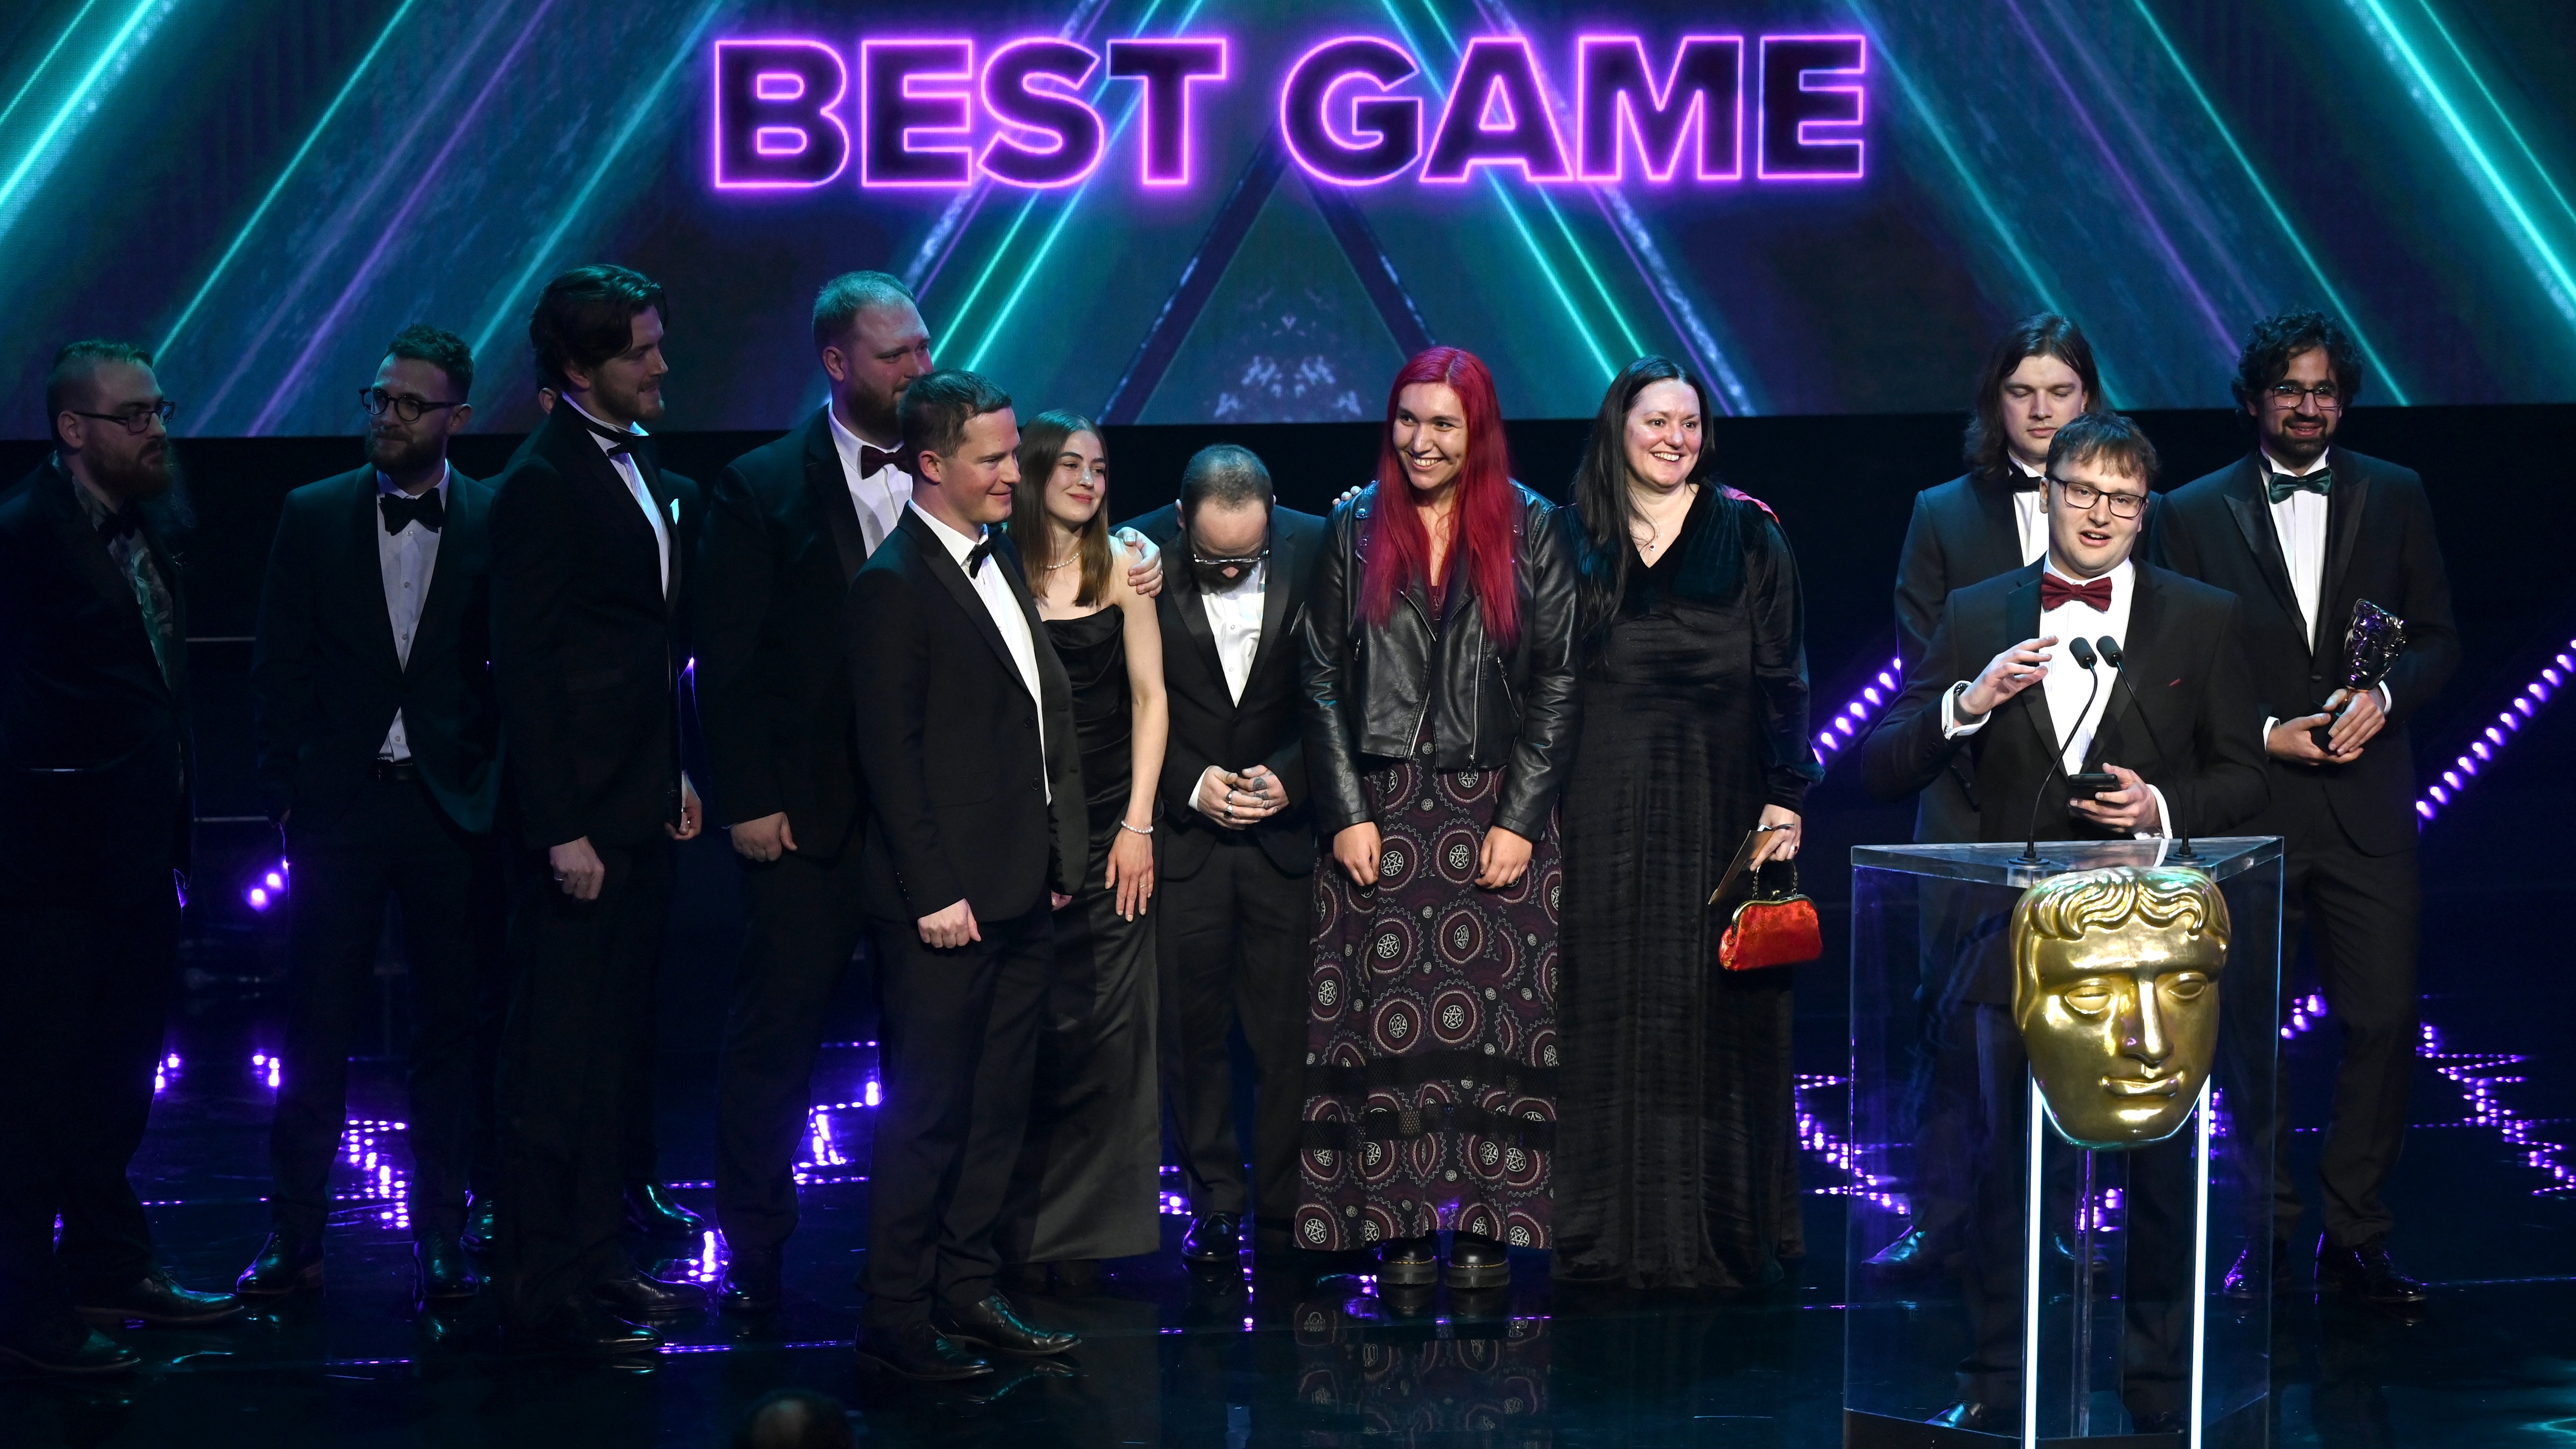 The Last of Us wins BAFTA Game of the Year Award, Steam sale for